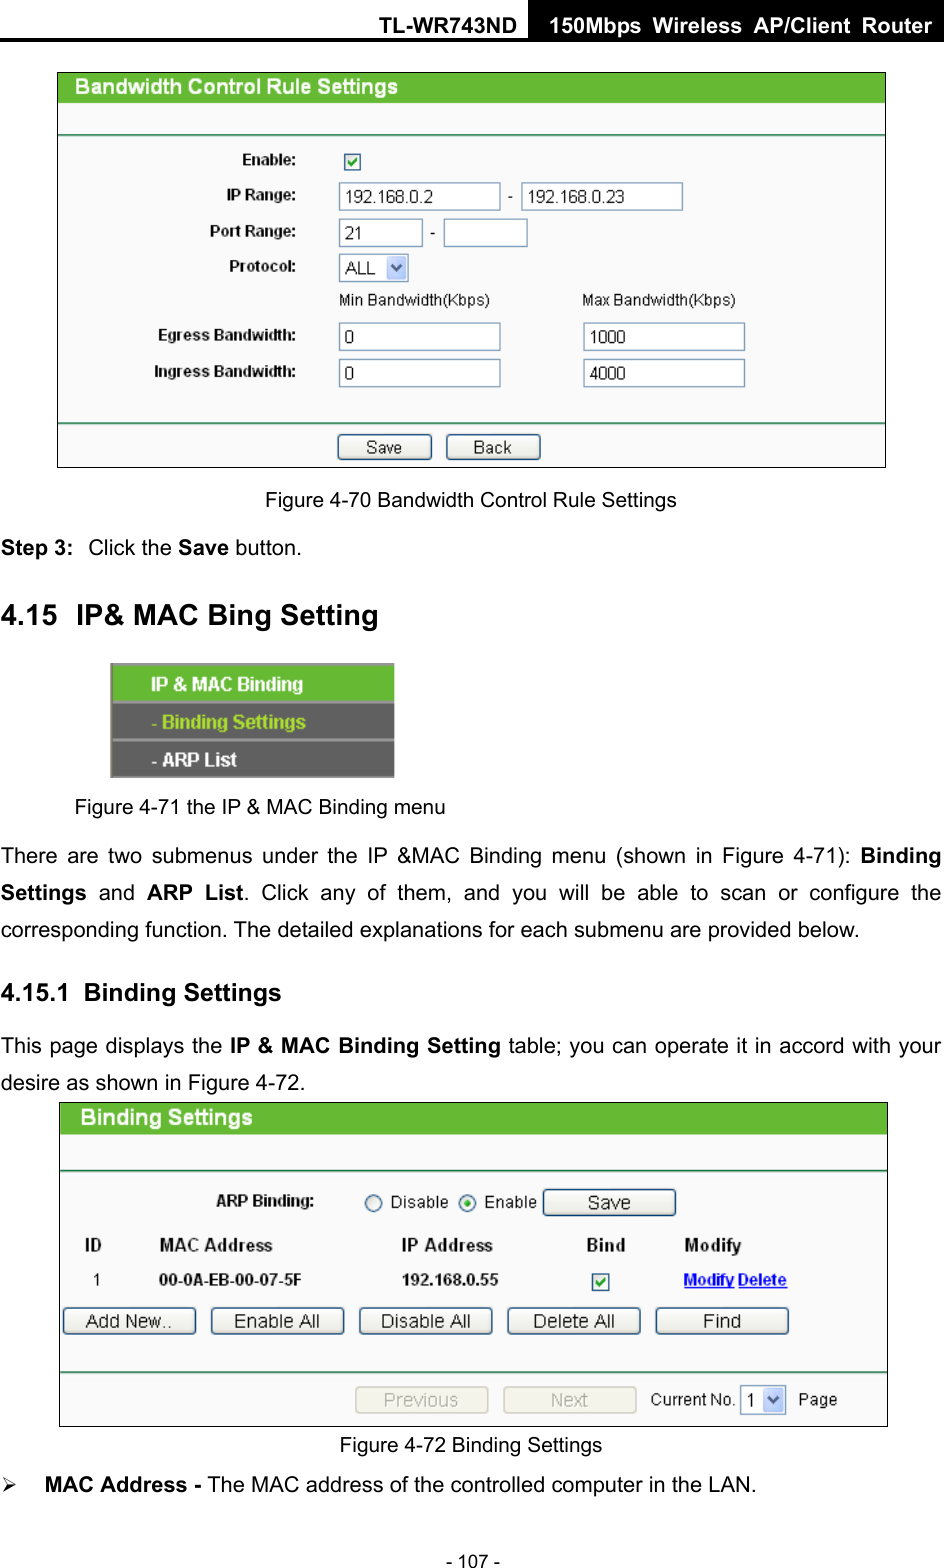 TL-WR743ND 150Mbps Wireless AP/Client Router - 107 -  Figure 4-70 Bandwidth Control Rule Settings Step 3:  Click the Save button. 4.15  IP&amp; MAC Bing Setting  Figure 4-71 the IP &amp; MAC Binding menu There are two submenus under the IP &amp;MAC Binding menu (shown in Figure 4-71):  Binding Settings  and ARP List. Click any of them, and you will be able to scan or configure the corresponding function. The detailed explanations for each submenu are provided below. 4.15.1  Binding Settings This page displays the IP &amp; MAC Binding Setting table; you can operate it in accord with your desire as shown in Figure 4-72.   Figure 4-72 Binding Settings  MAC Address - The MAC address of the controlled computer in the LAN.   